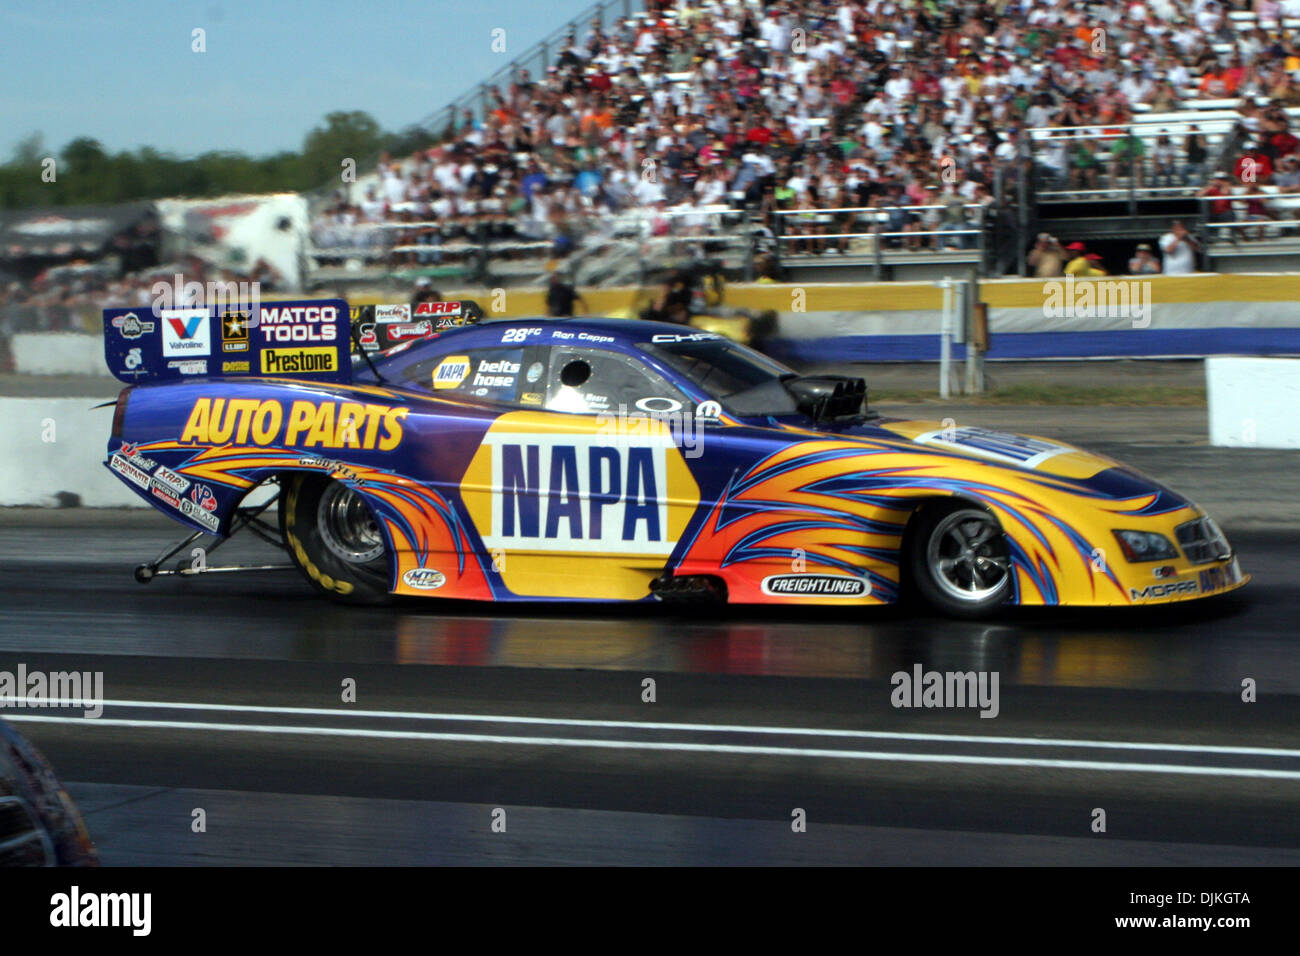 Sept. 6, 2010 - Indianapolis, Indiana, United States of America - 06 September2010: Ron Capps heads down track during eliminations. The U.S. Nationals were held at O'Reilly Raceway Park in Indianapolis, Indiana. (Credit Image: © Alan Ashley/Southcreek Global/ZUMApress.com) Stock Photo